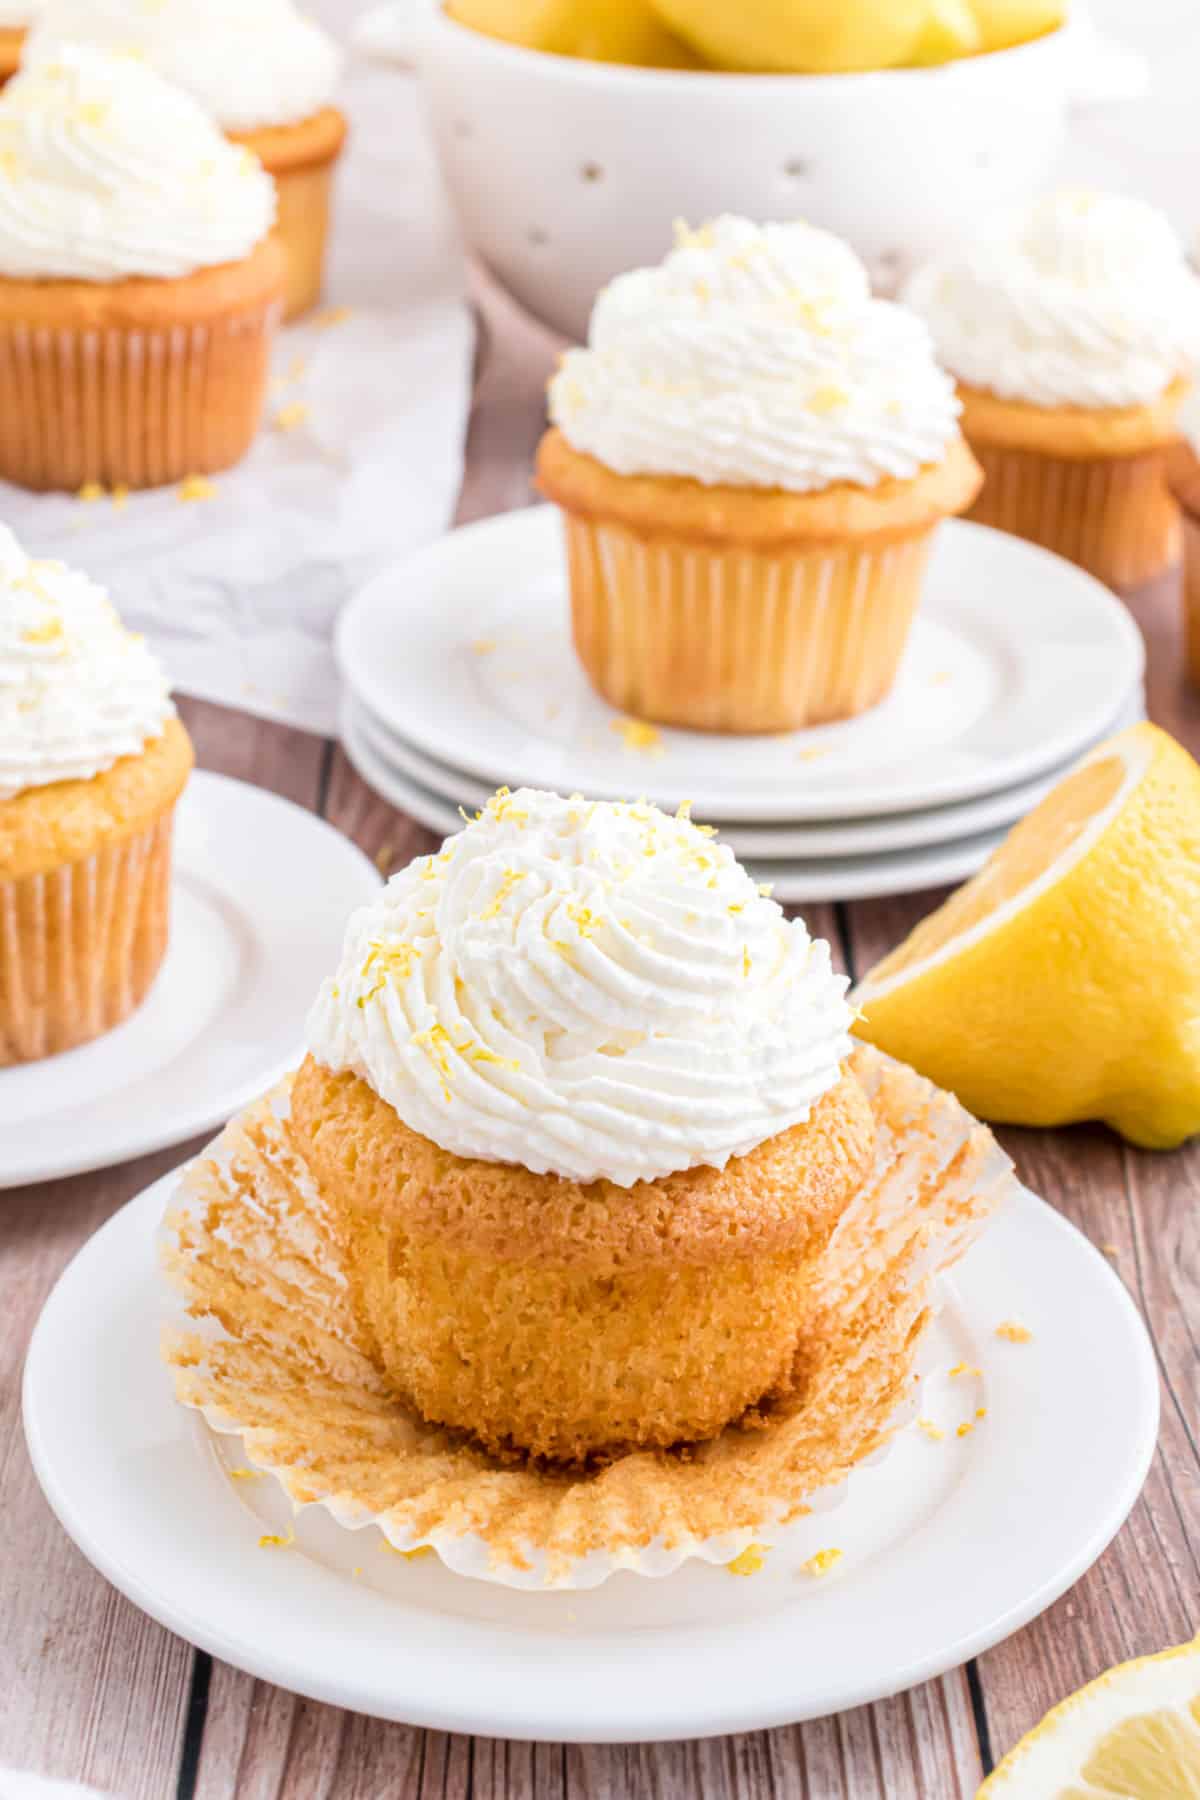 Lemon cupcake with lemon whipped cream on a white plate with wrapped taken off.